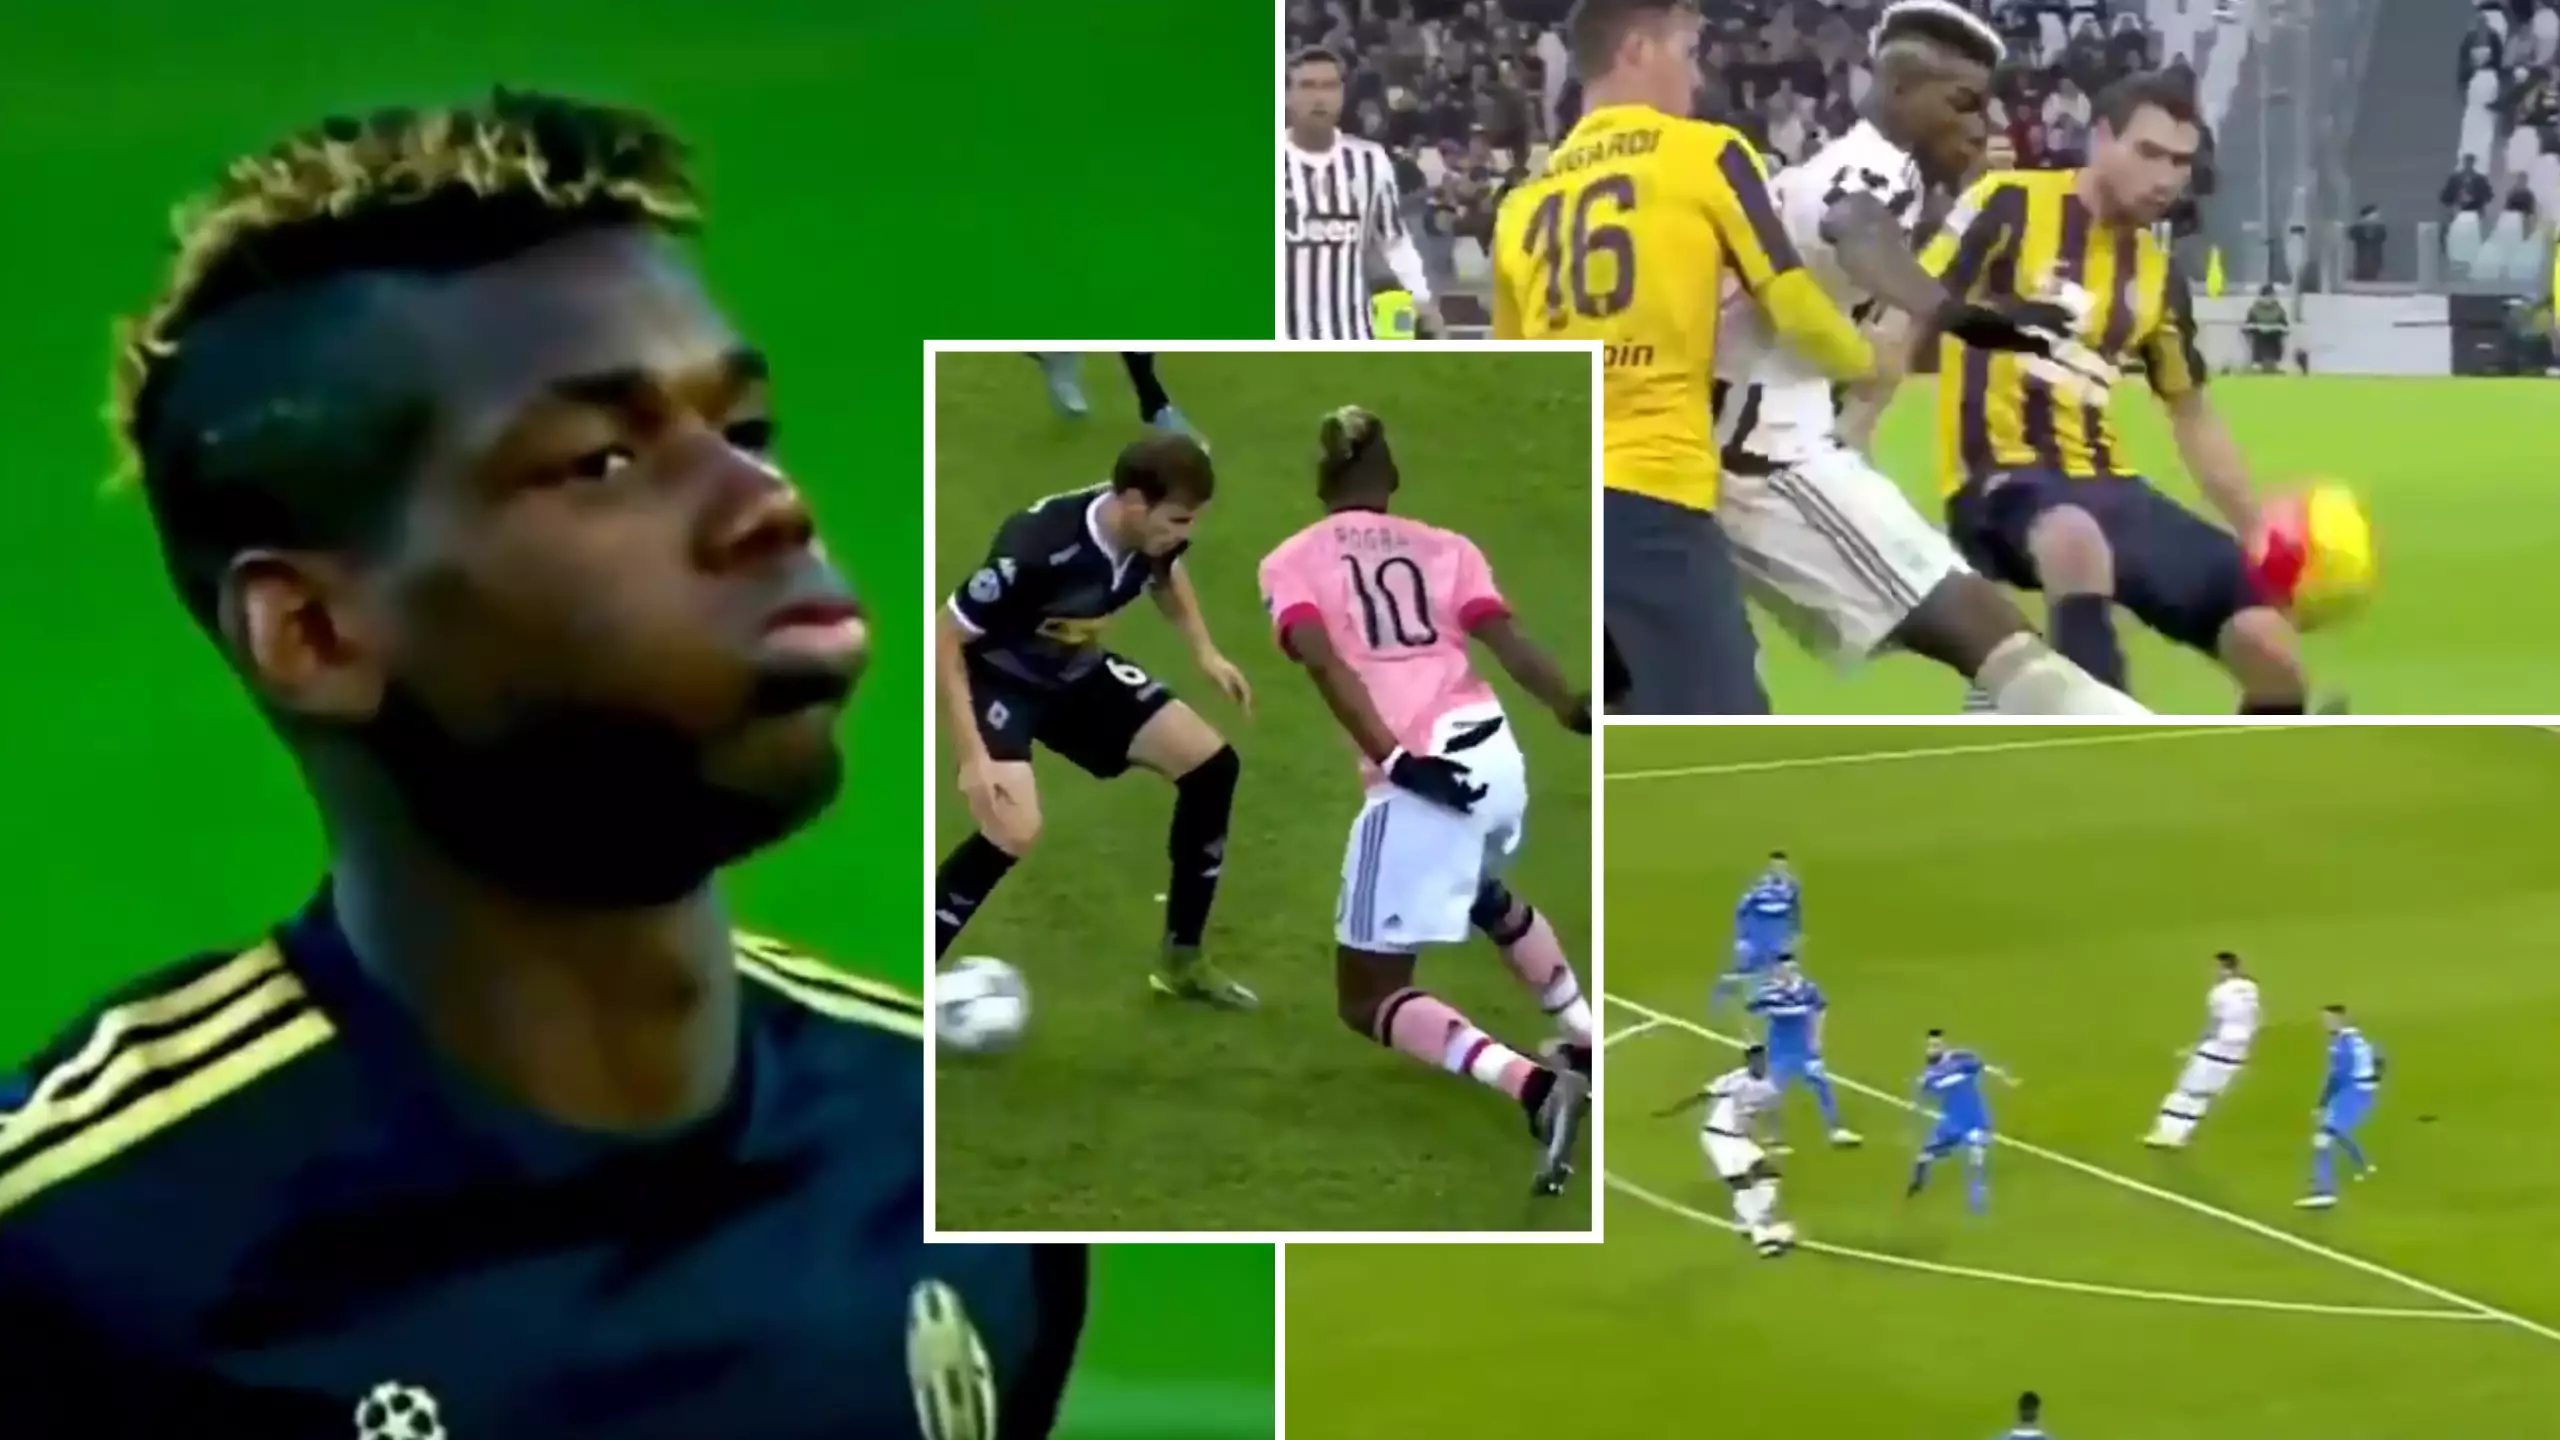 Paul Pogba's Incredible 15/16 Season Highlights Show Why Manchester United Paid £89 Million For Him